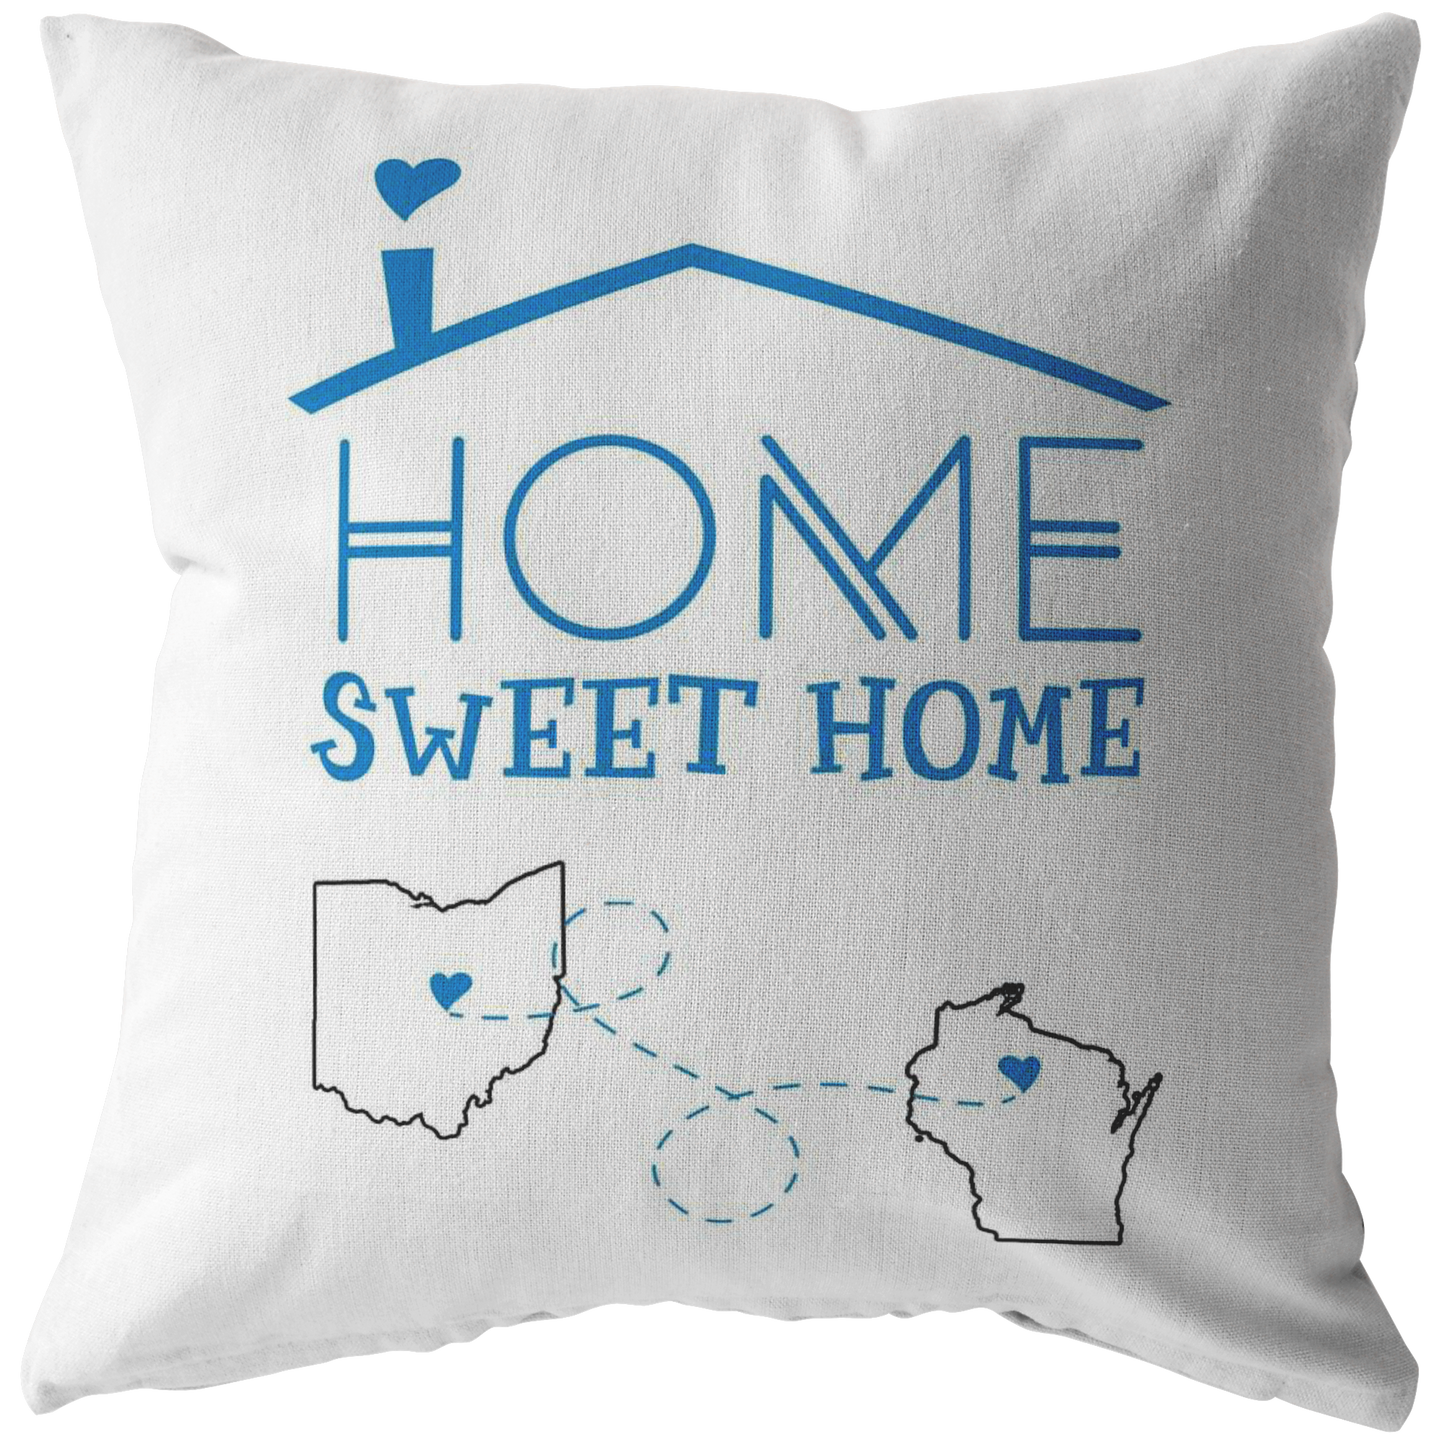 ND-pl20421971-sp-17630 - Map Throw Pillow Covers Ohio Wisconsin - Home Sweet Home OH